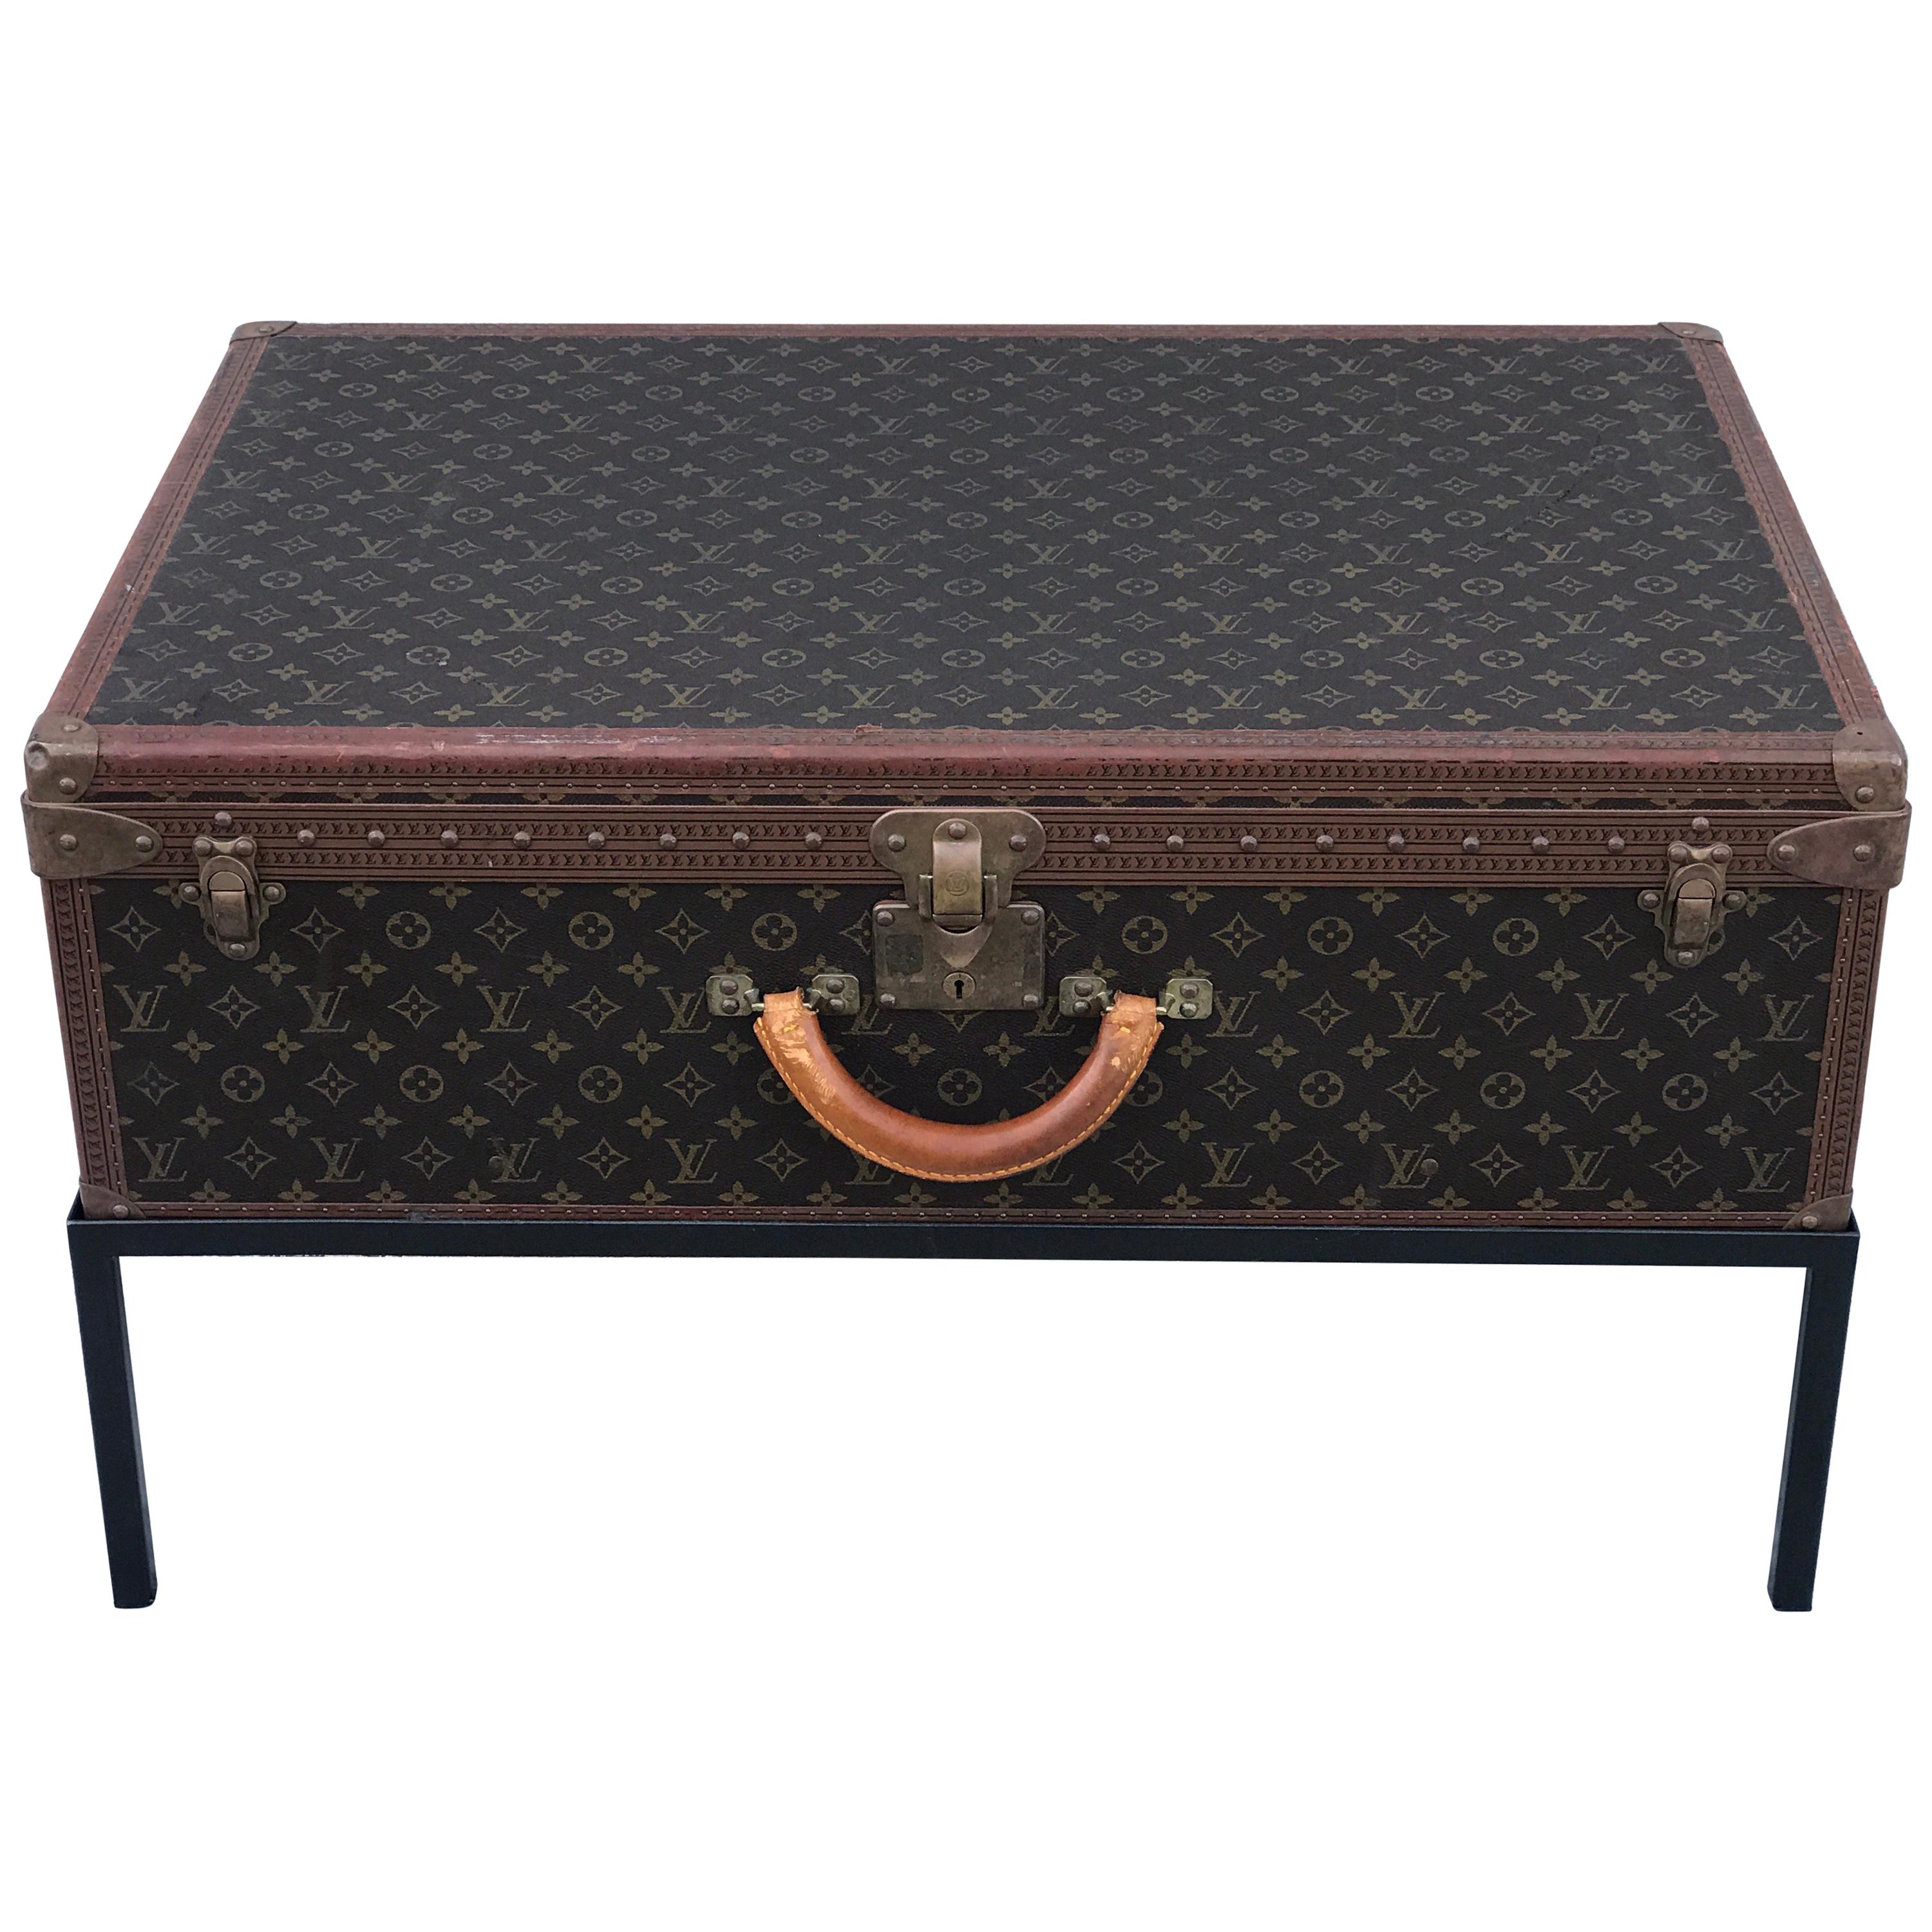 Louis Vuitton Trunk on Stand, Large